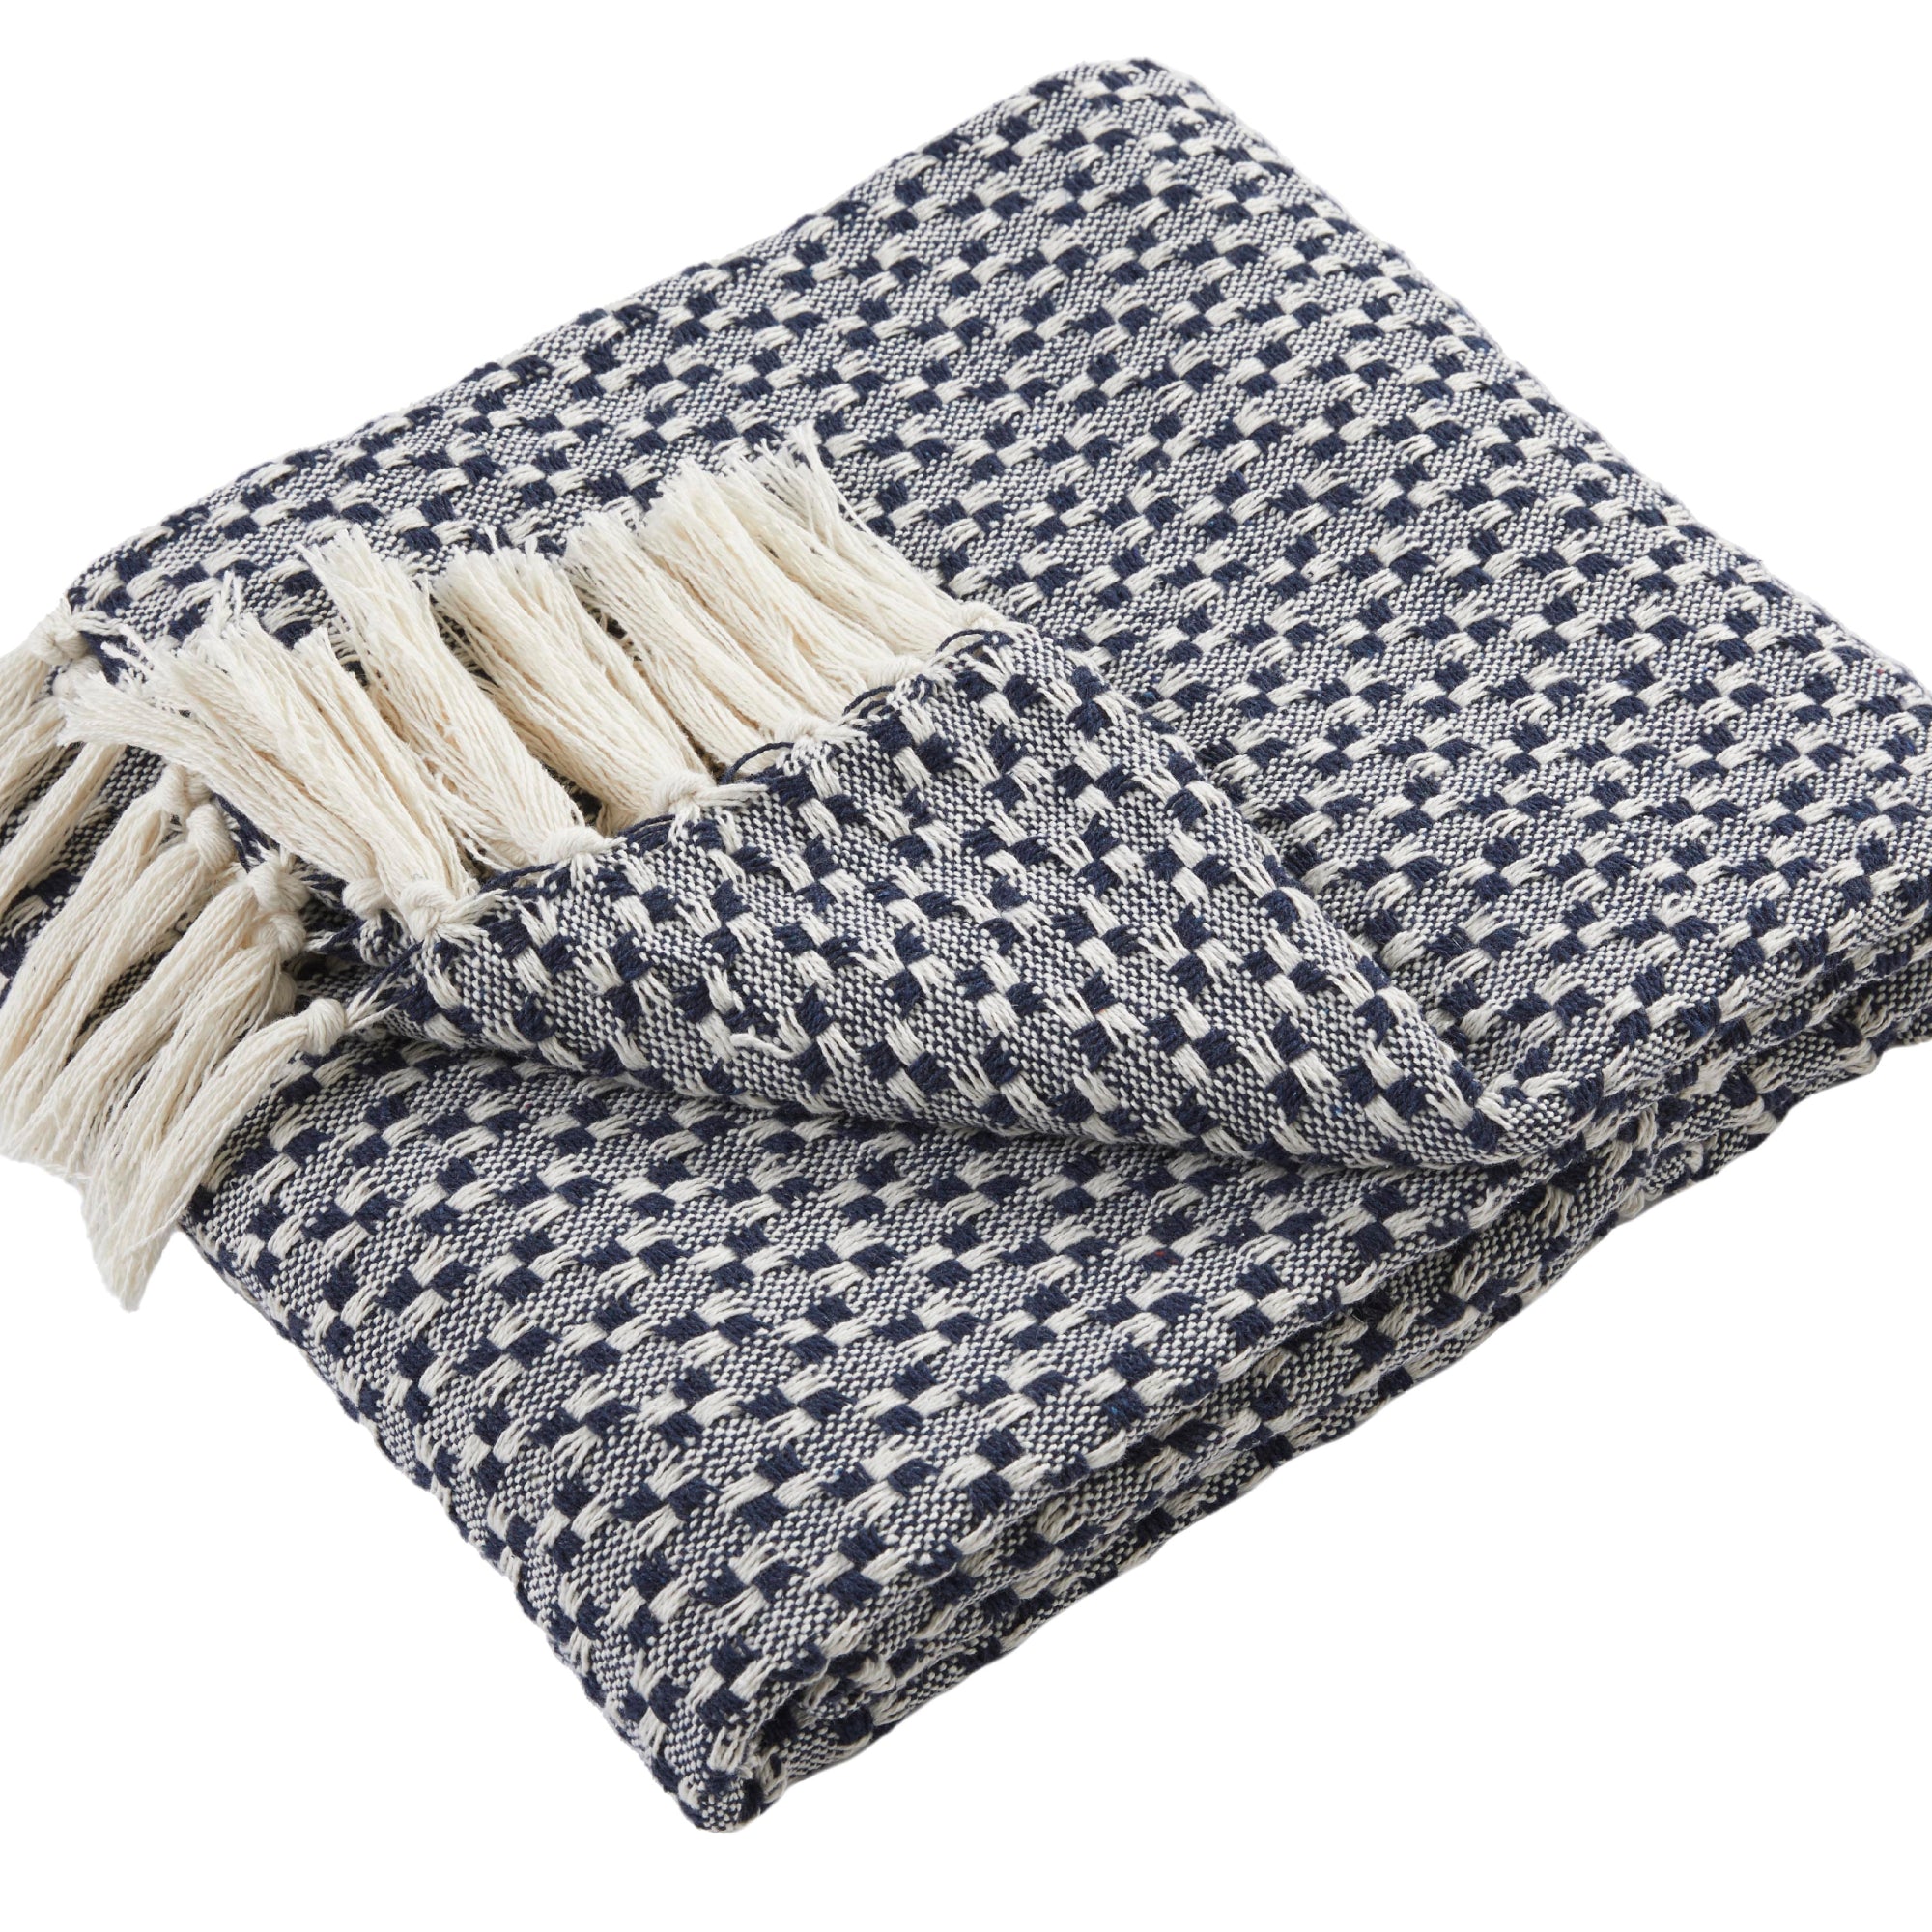 Throw Bexley by Appletree Loft in Navy